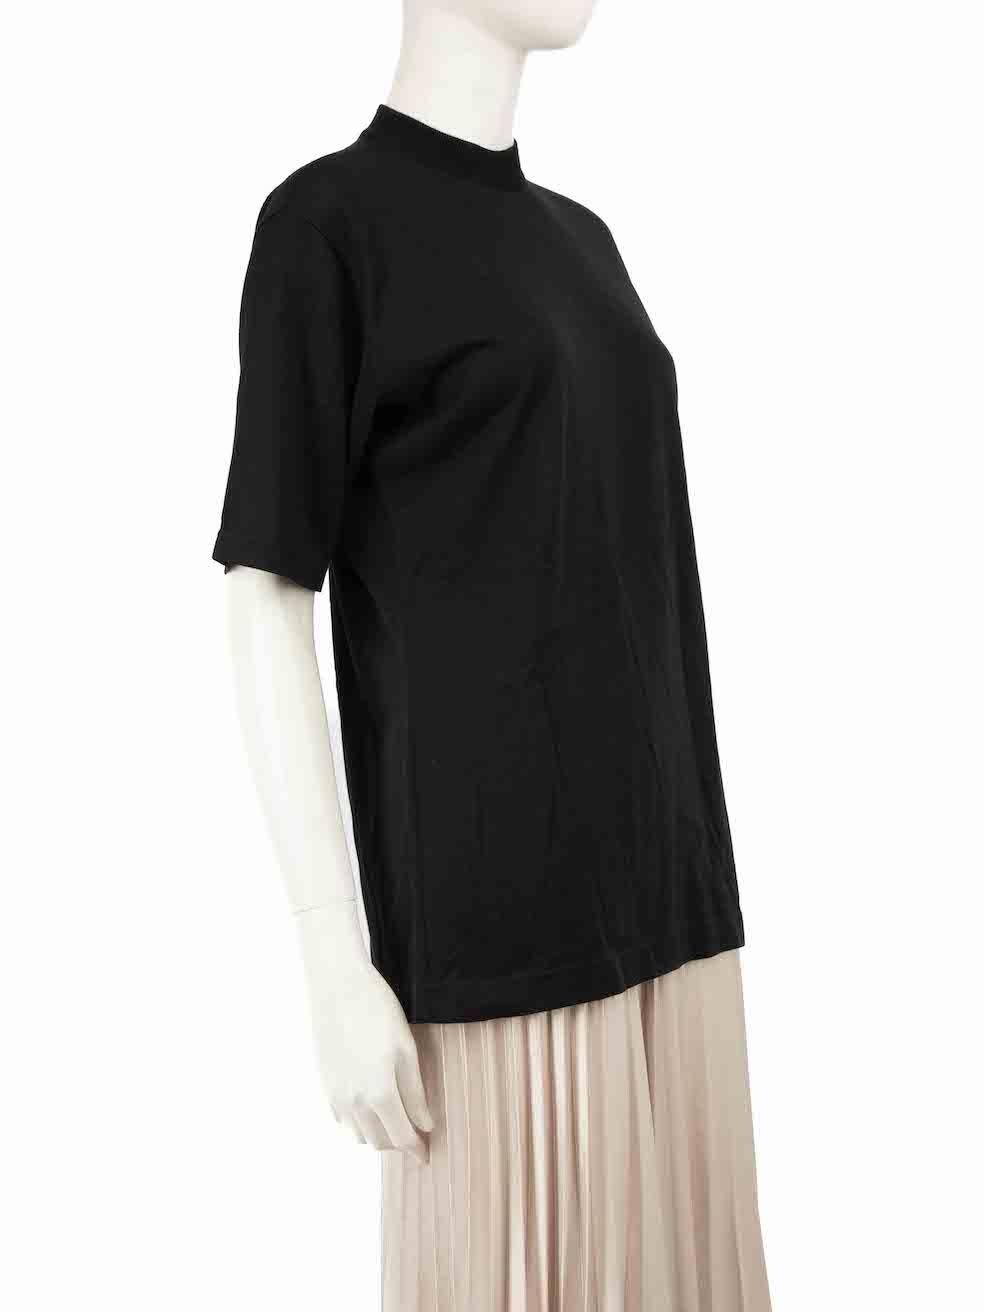 CONDITION is Good. Minor wear to top is evident. Light wear to the knit with a very small hole seen at the front of the neck on this used Céline designer resale item.
 
 
 
 Details
 
 
 Black
 
 Wool
 
 Top
 
 Short sleeves
 
 Mock neck
 
 Logo